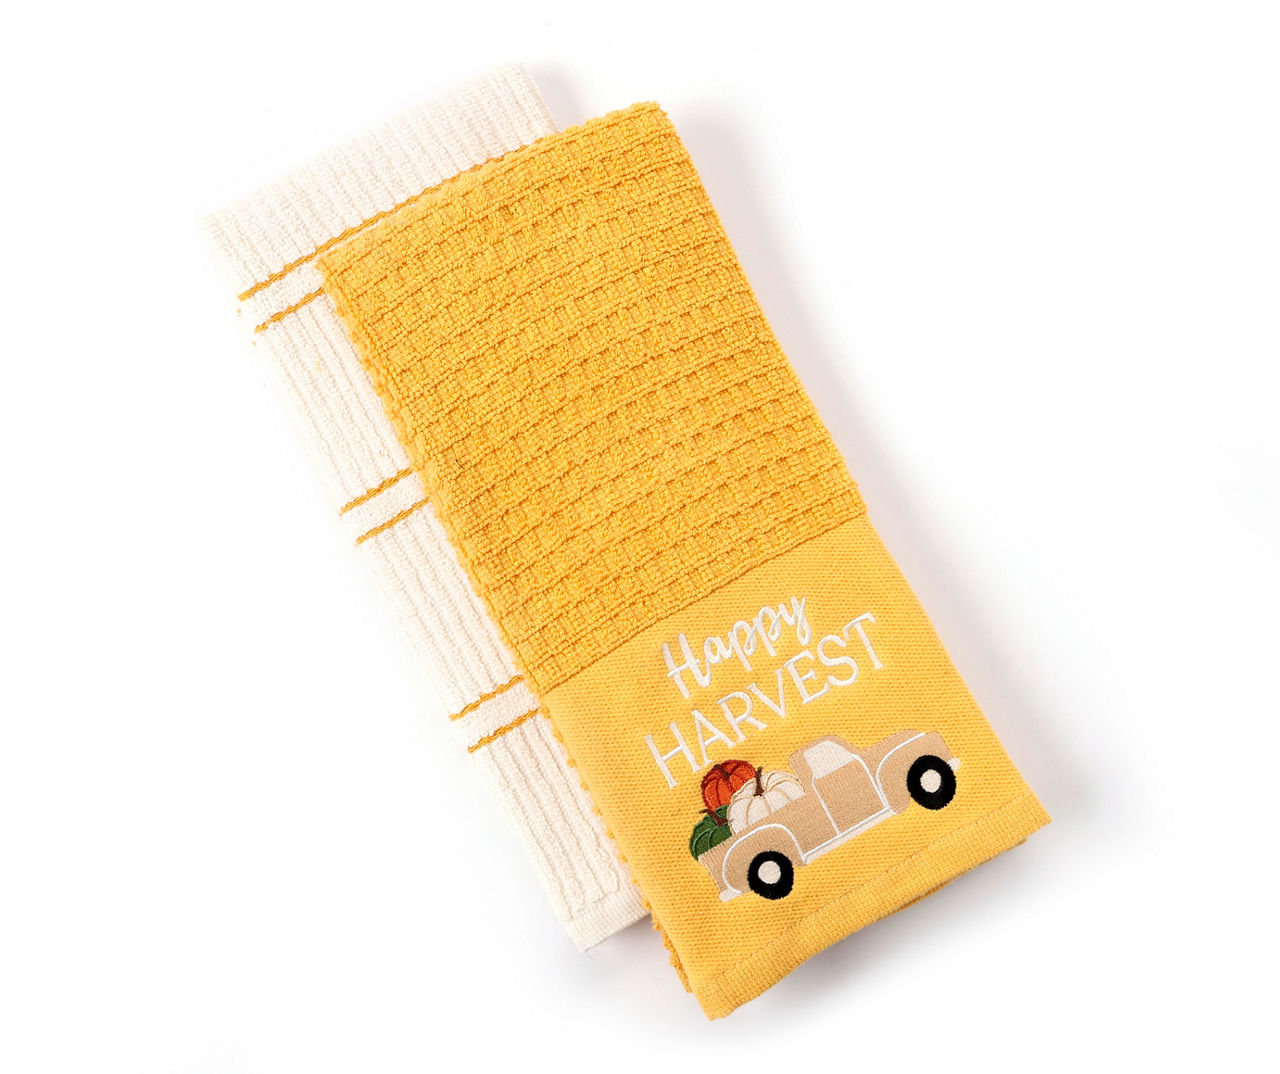 Happy Camping Dish Towel - Paine Products